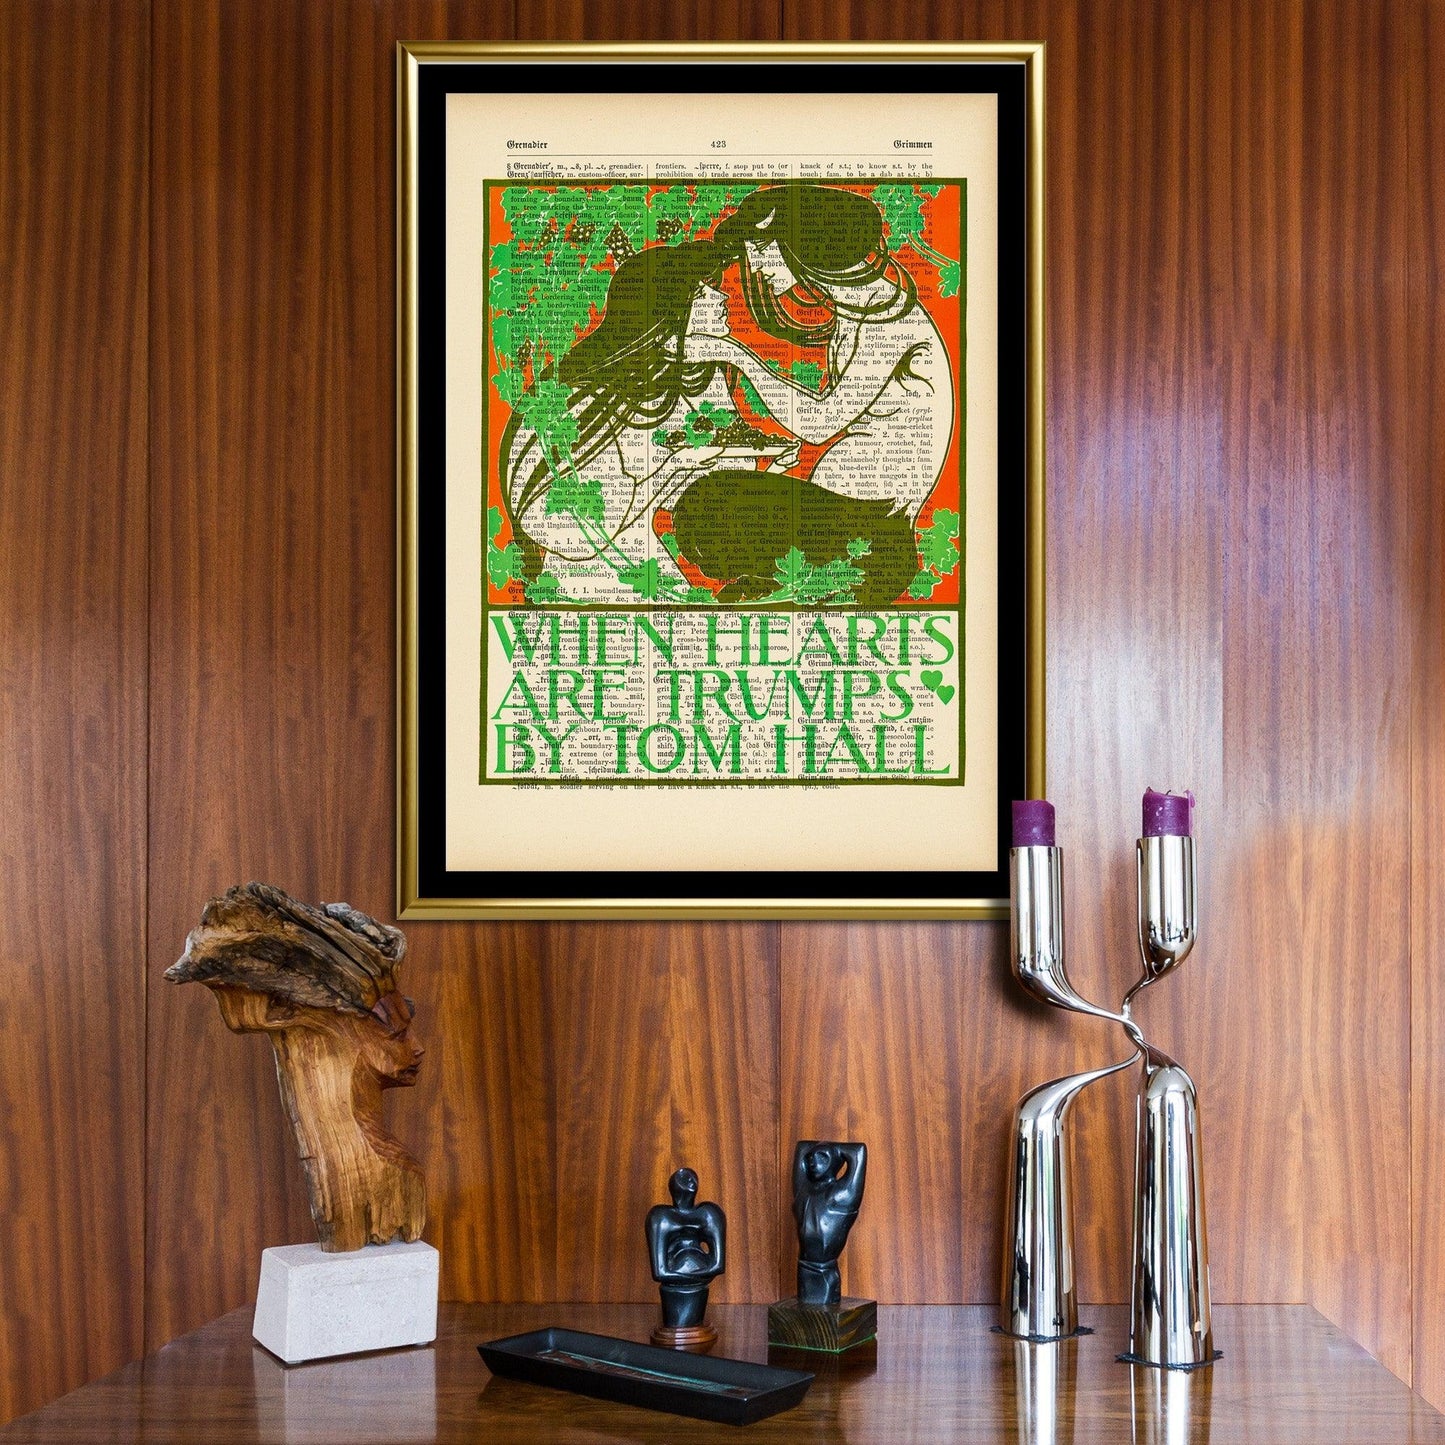 Give your home decor a touch of elegance through our exquisite When Hearts Are Trumps reproduction poster. The artwork is a collage with the illustration for a book of verse by Tom Hall (Chicago: Stone and Kimball, 1894) created by Will Bradley (American graphic designer, 1868-1962). Year of created 1894.